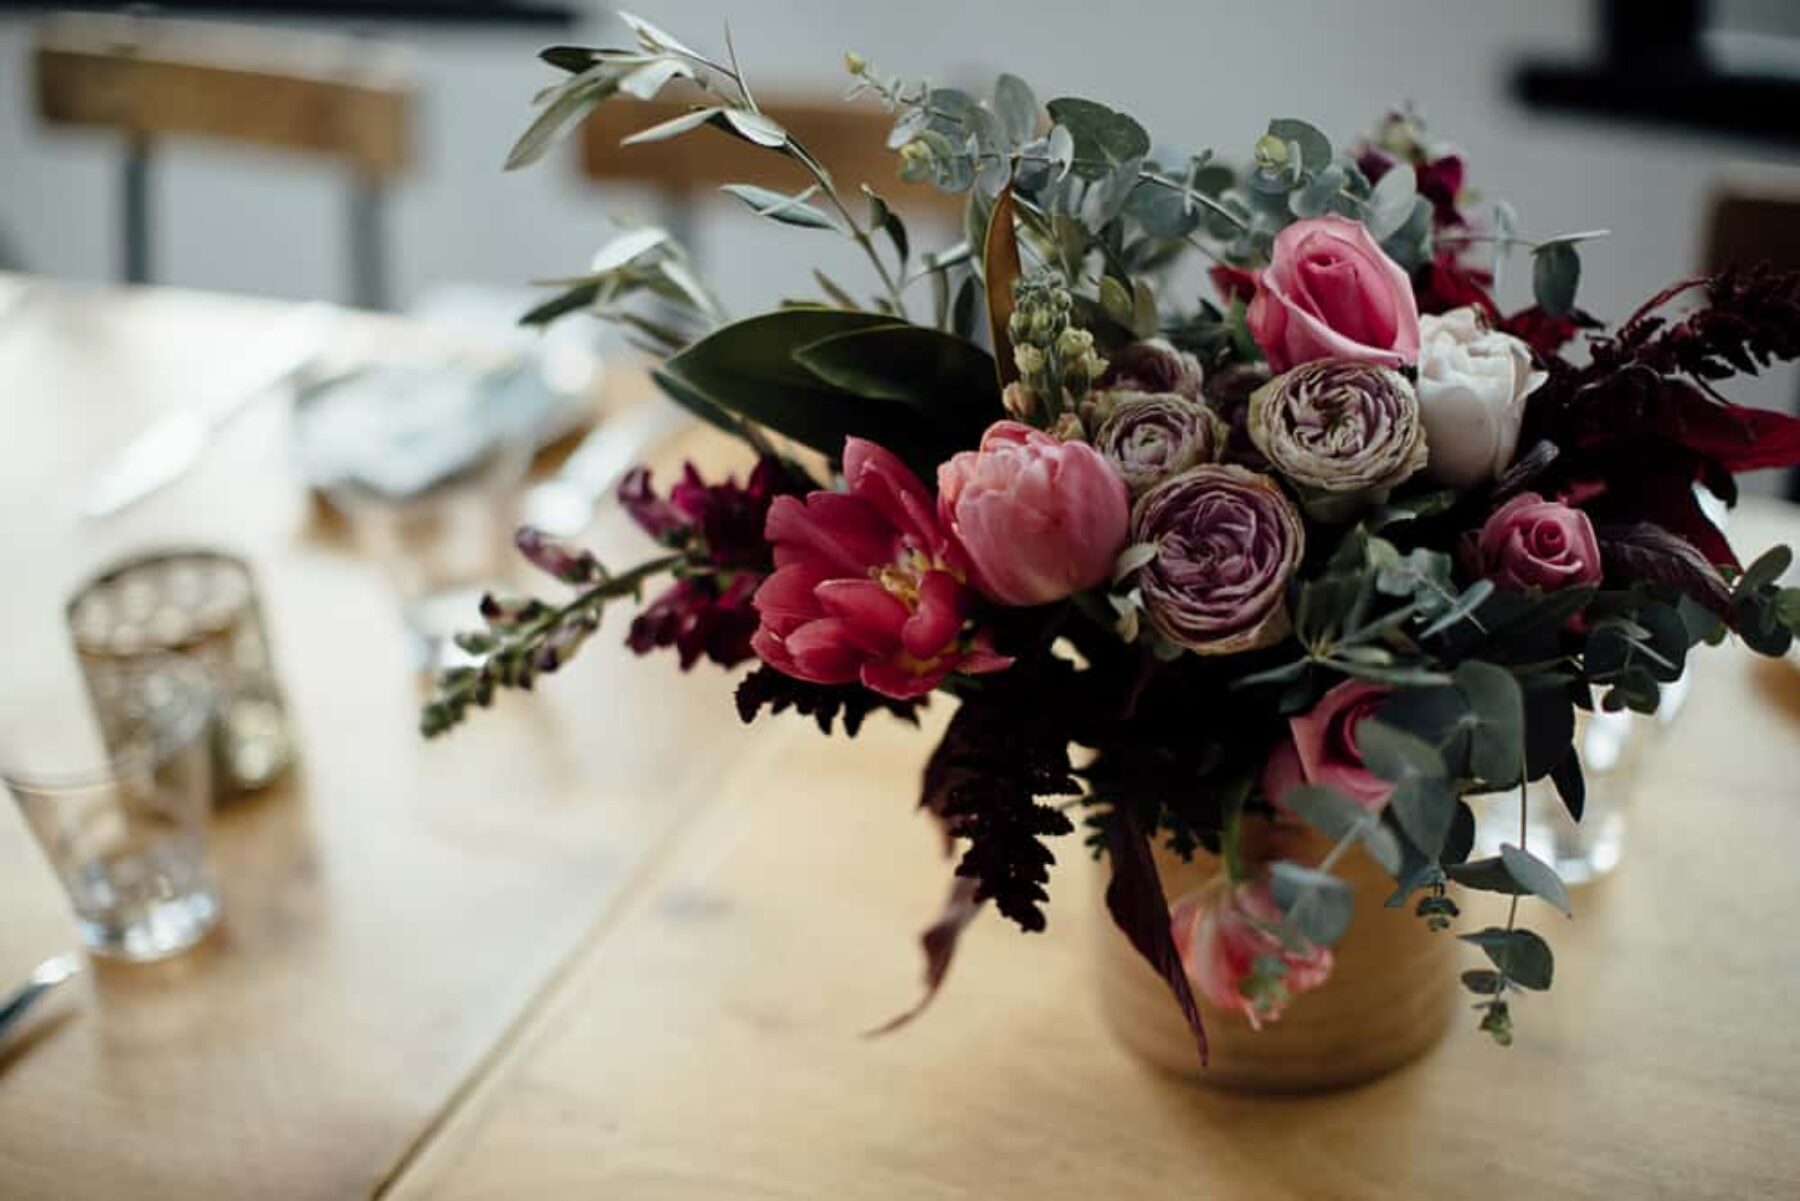 Industrial Collingwood wedding at Craft & Co. photography by Free the Bird